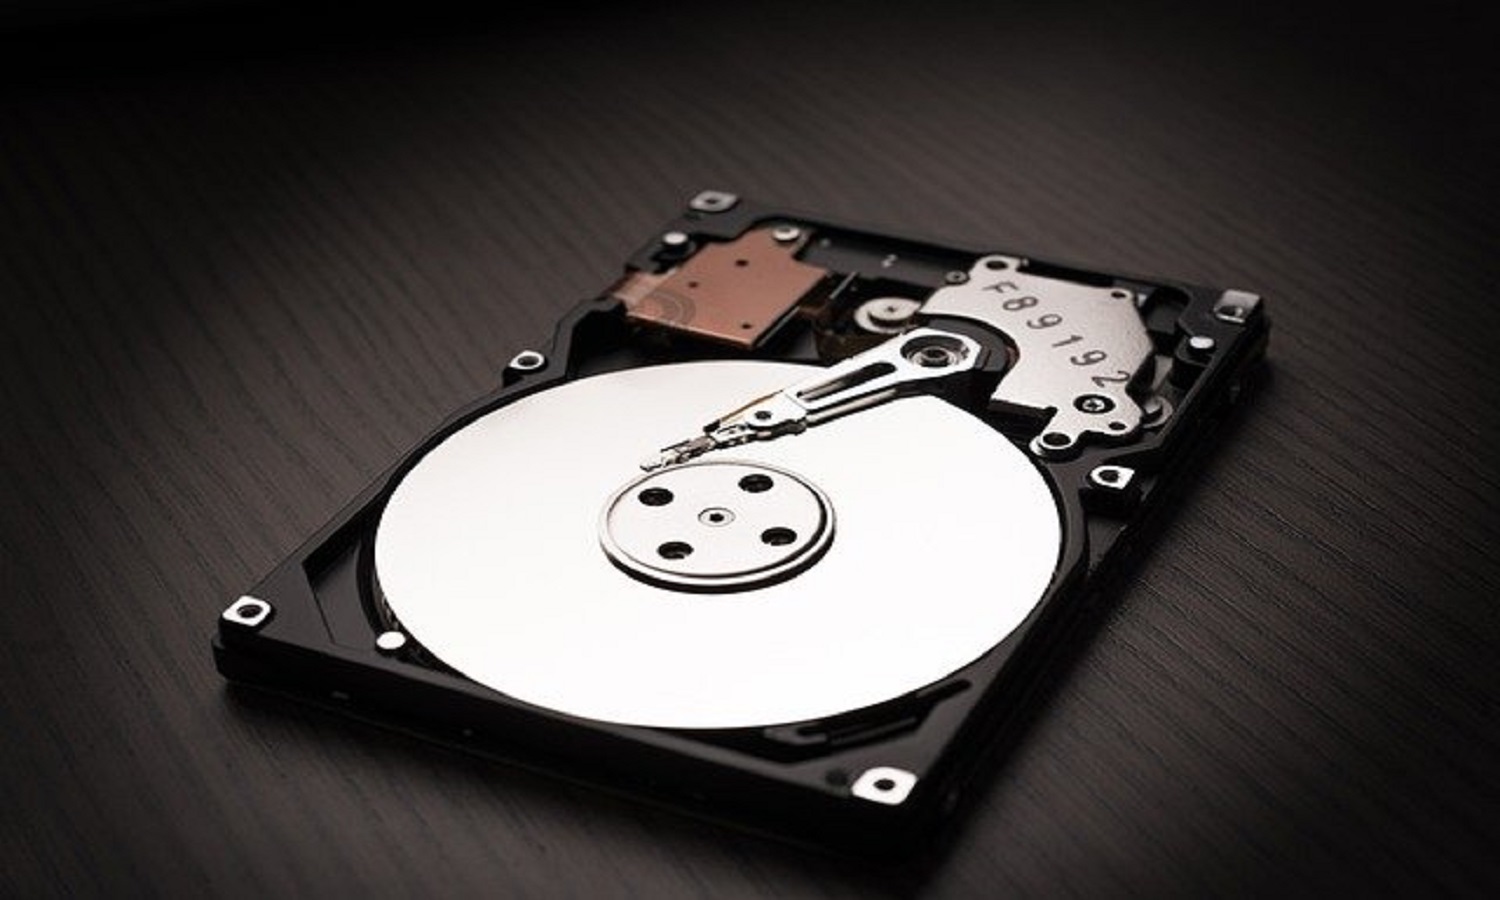 How Does a Hard Drive Works?